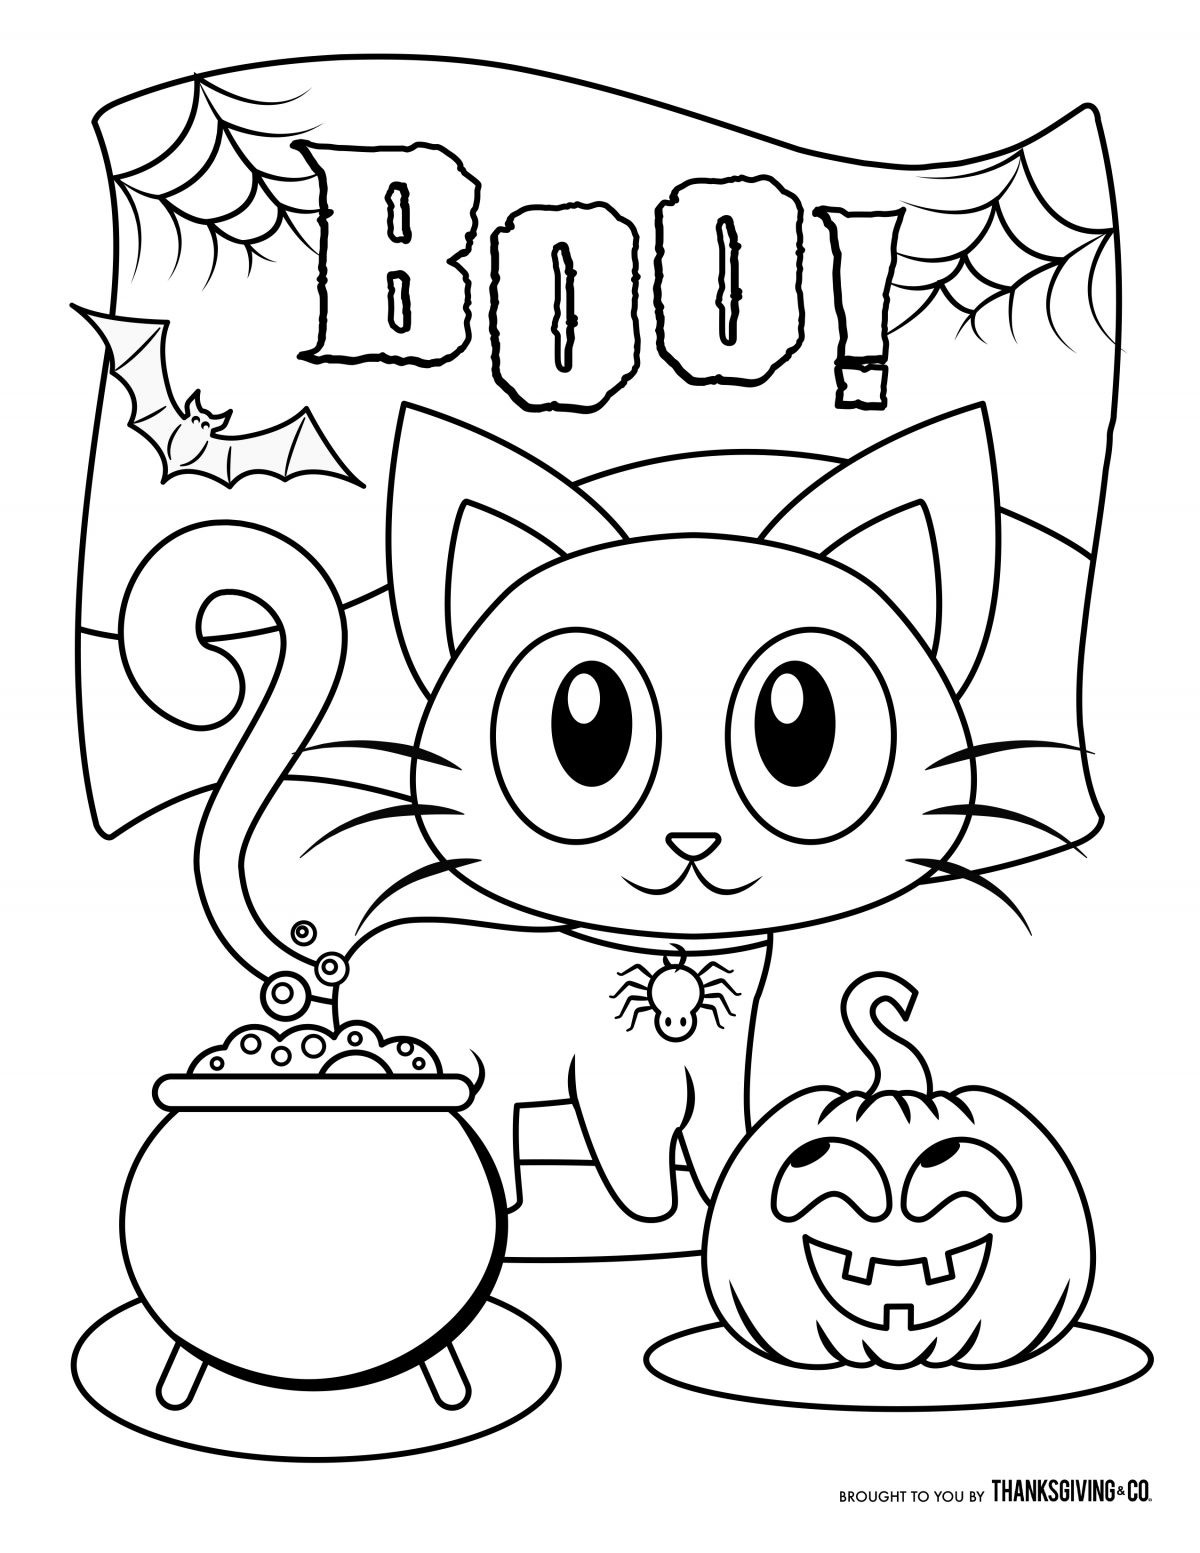 Halloween Coloring Book
 Free Halloween coloring pages for kids or for the kid in